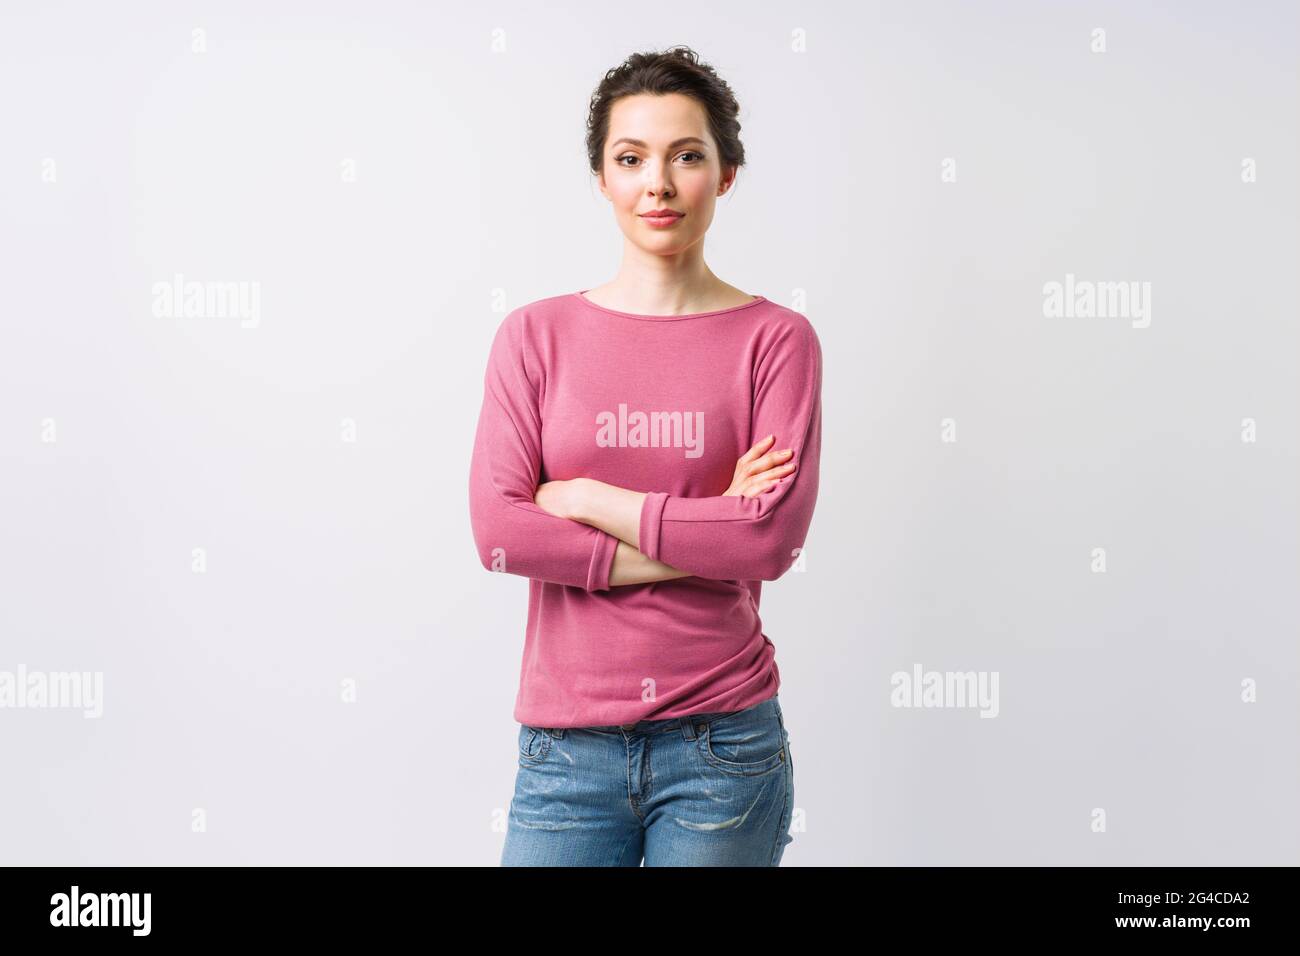 Young woman portrait. Adorable brunette in a sweater looking at the camera with her arms crossed. Stock Photo